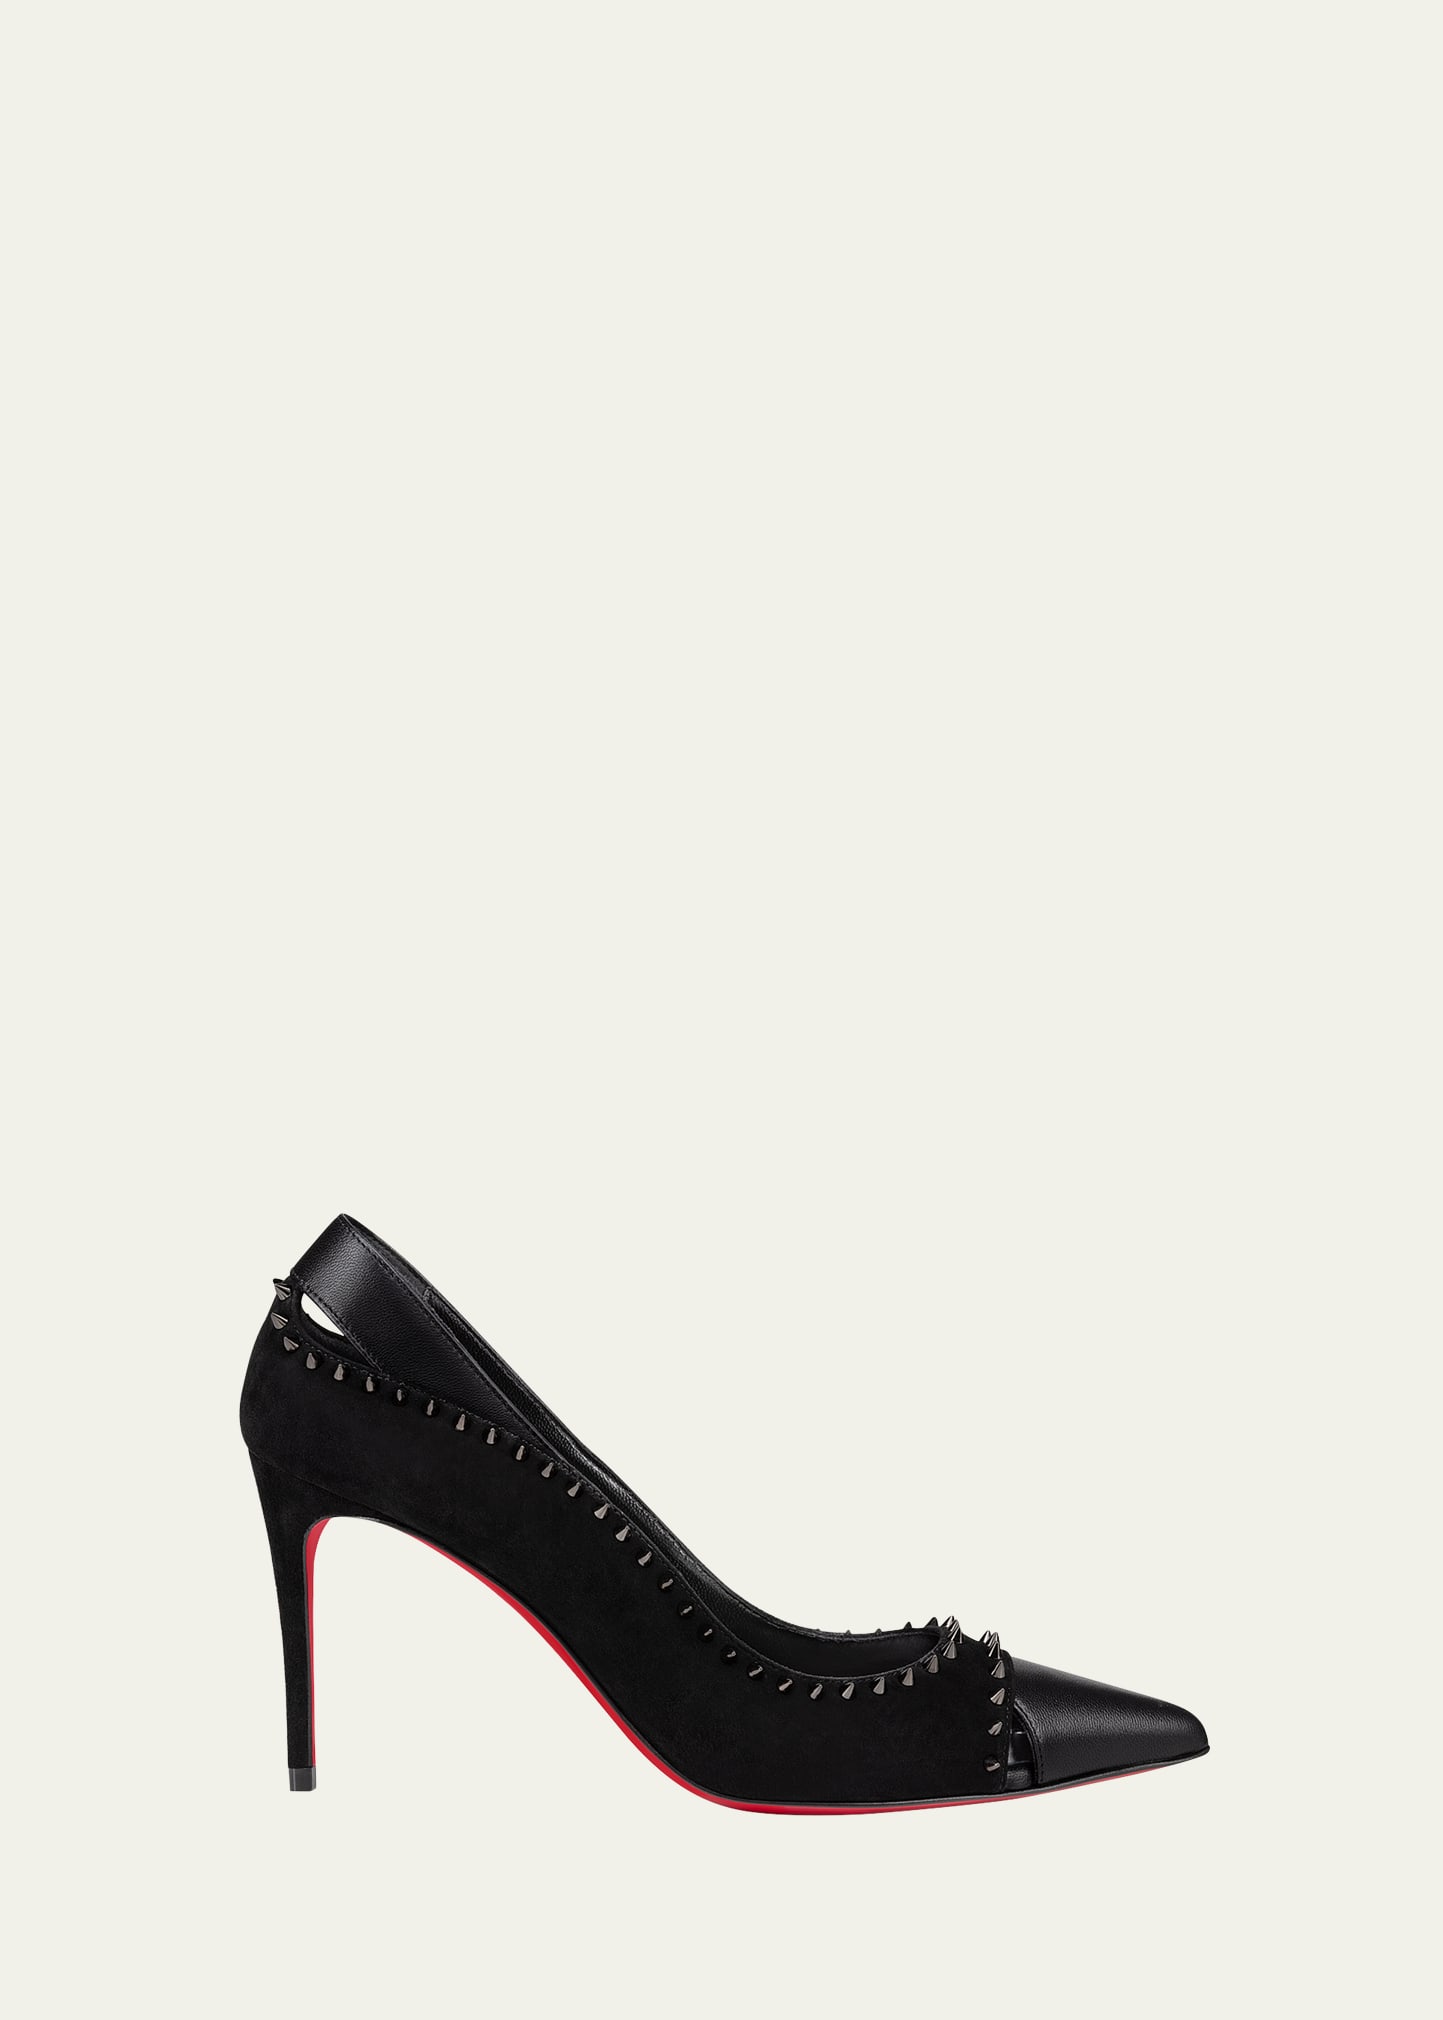 Christian Louboutin shoes prices